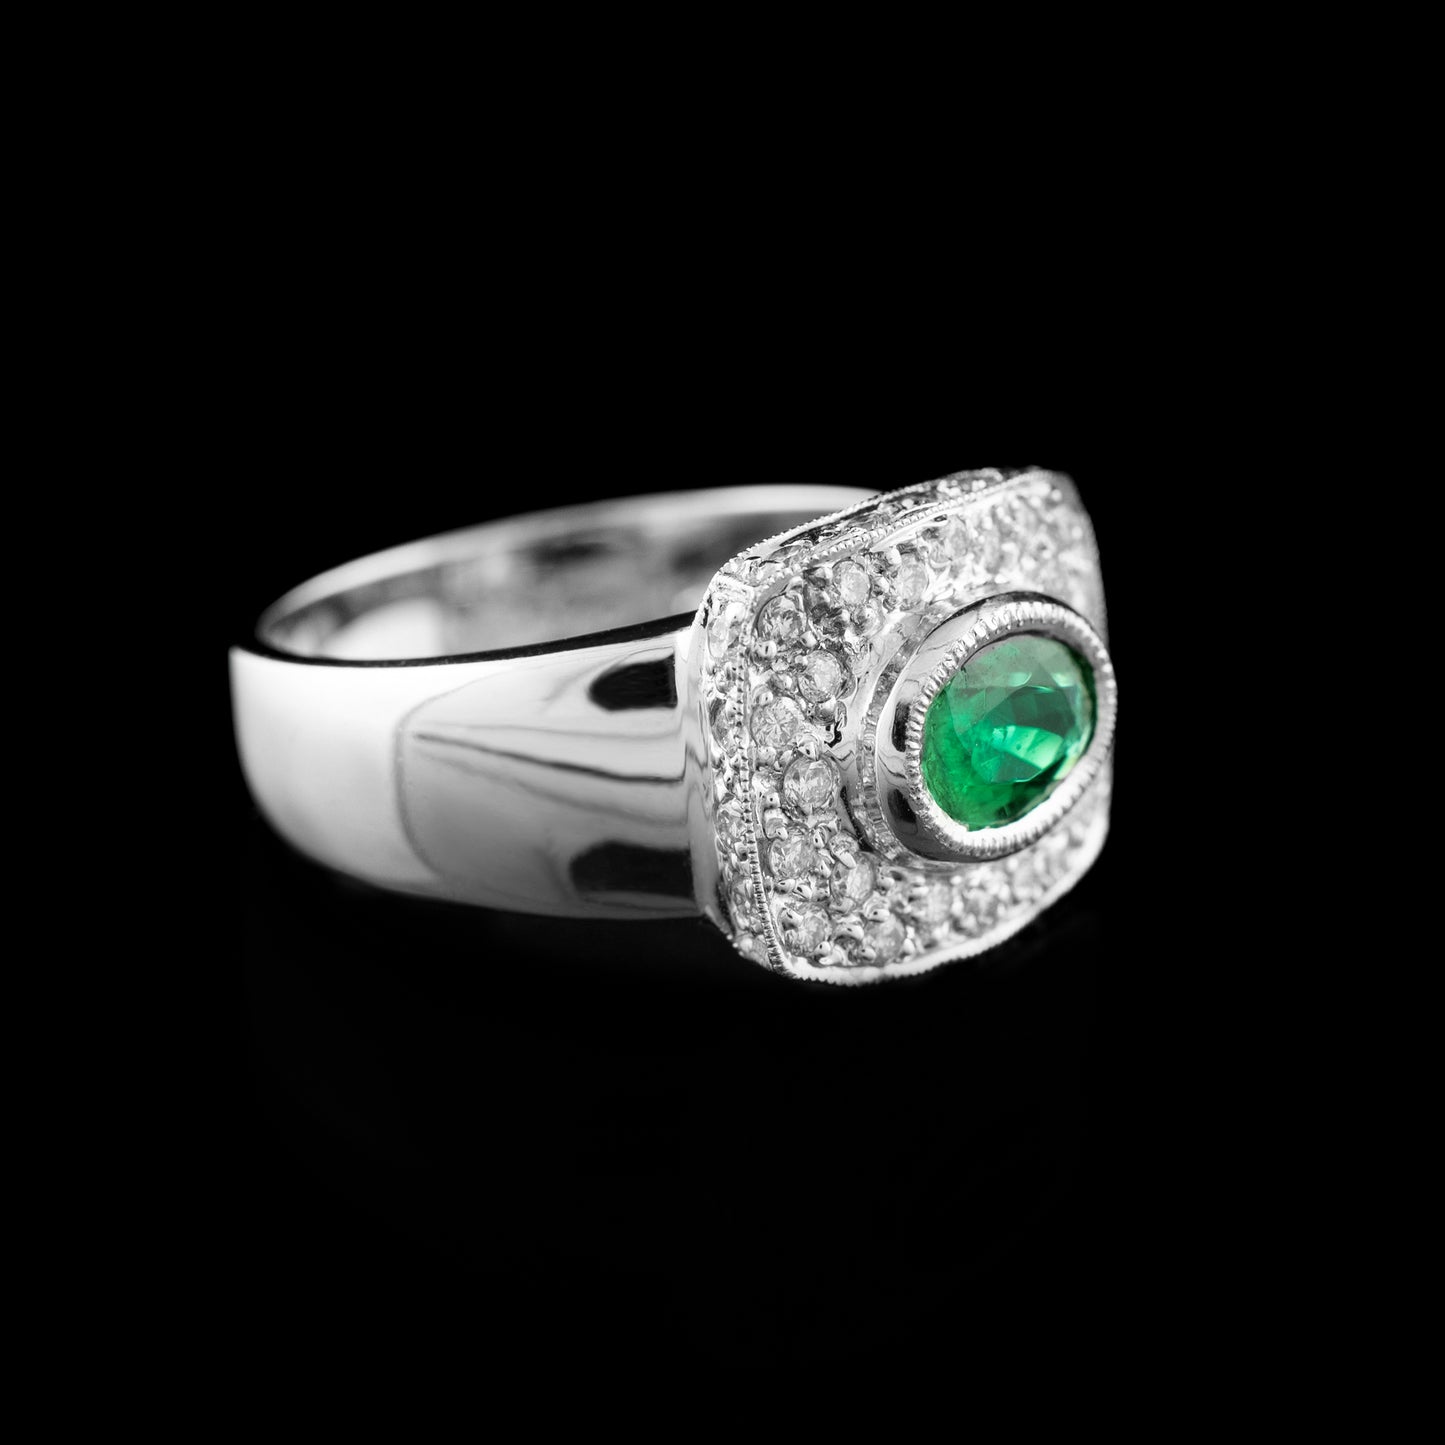 The Bold Emerald Ring